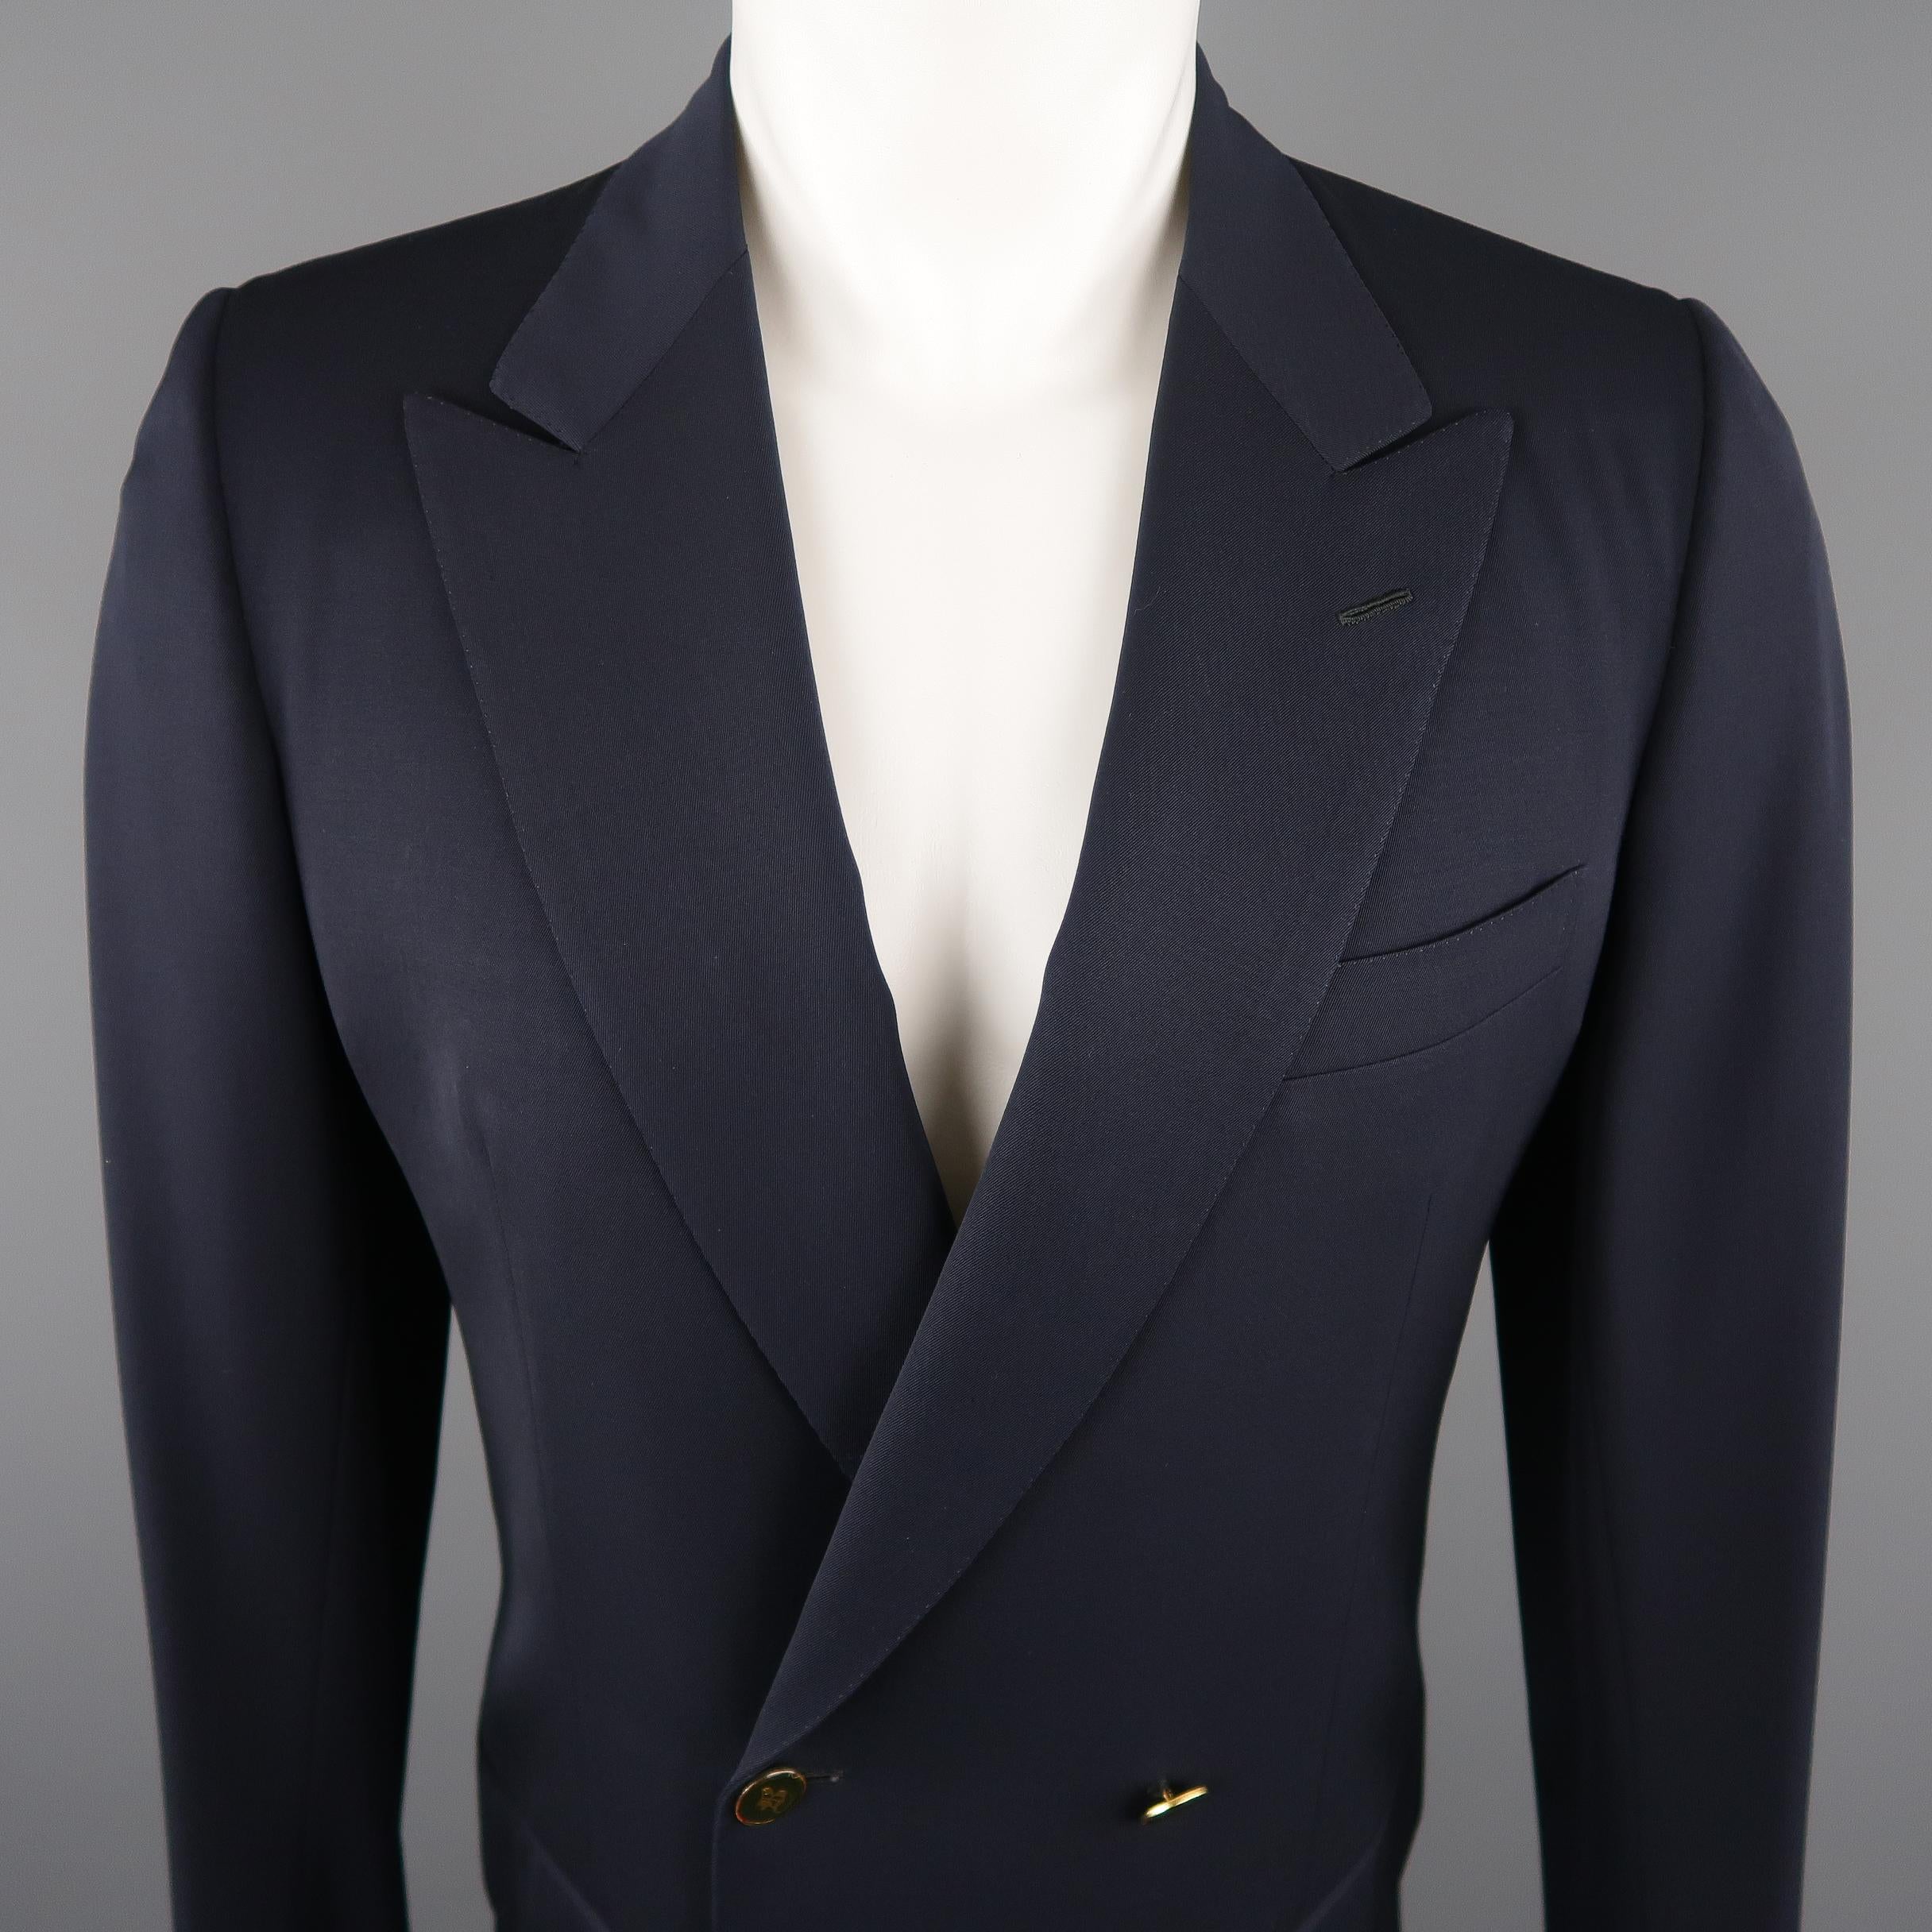 BRIONI classic blazer comes in a navy tone in a solid wool material, featuring a peak lapel, slit and flap pockets, double breasted and with a double vent at back. Made in Italy.
 
Excellent Pre-Owned Condition.
Marked: 48 IT
 
Measurements:
